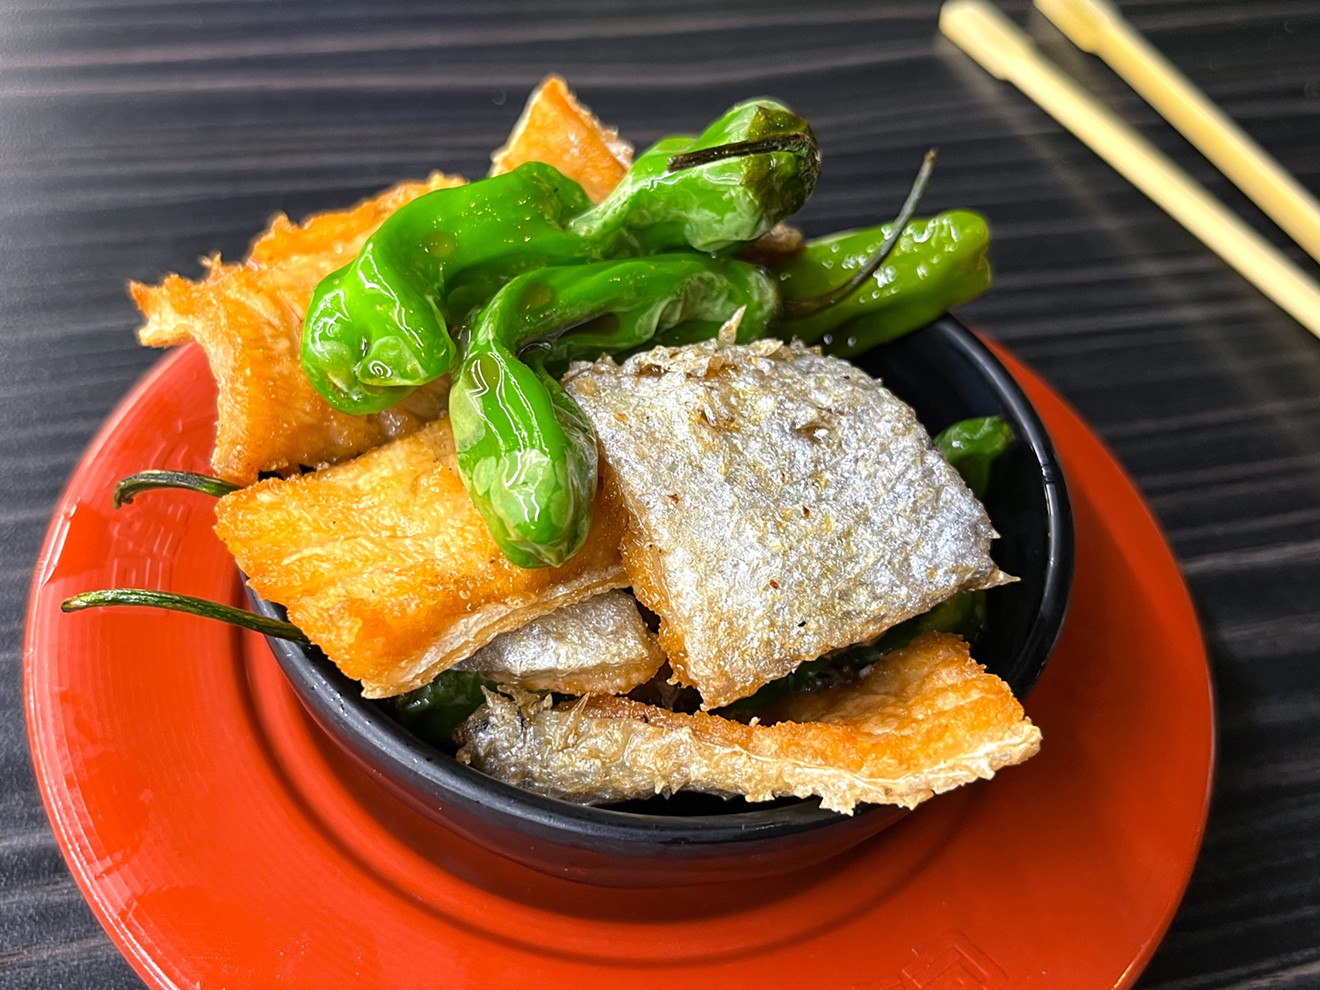 Fried salmon skin with blistered shishito peppers is a genuinely good dish.